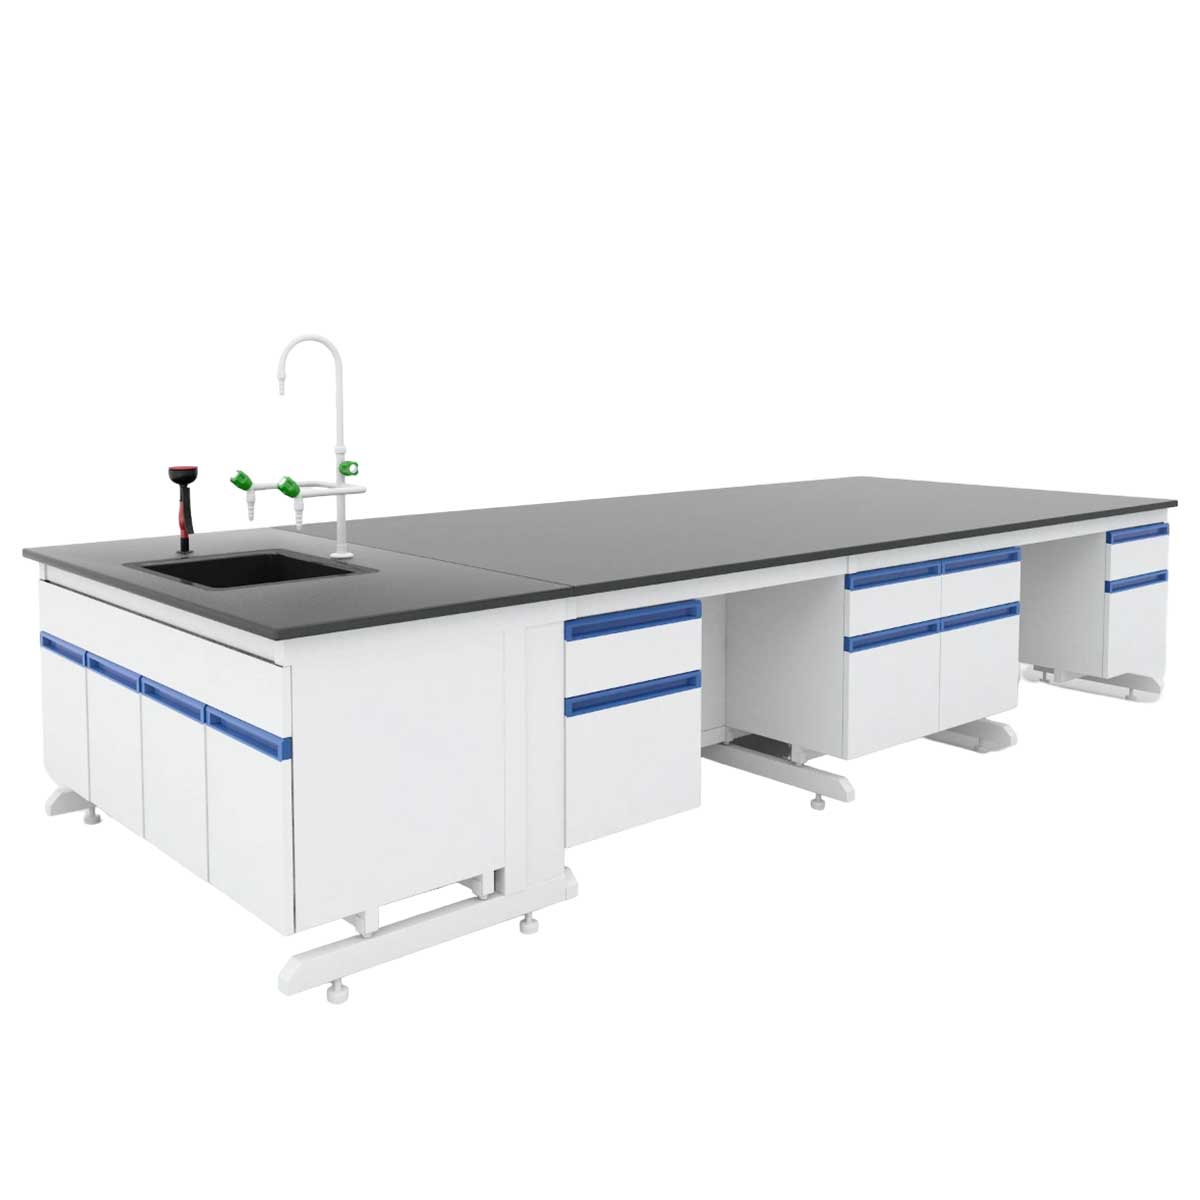 Physics Lab Furniture Manufacturers, Suppliers, Exporters in Delhi 